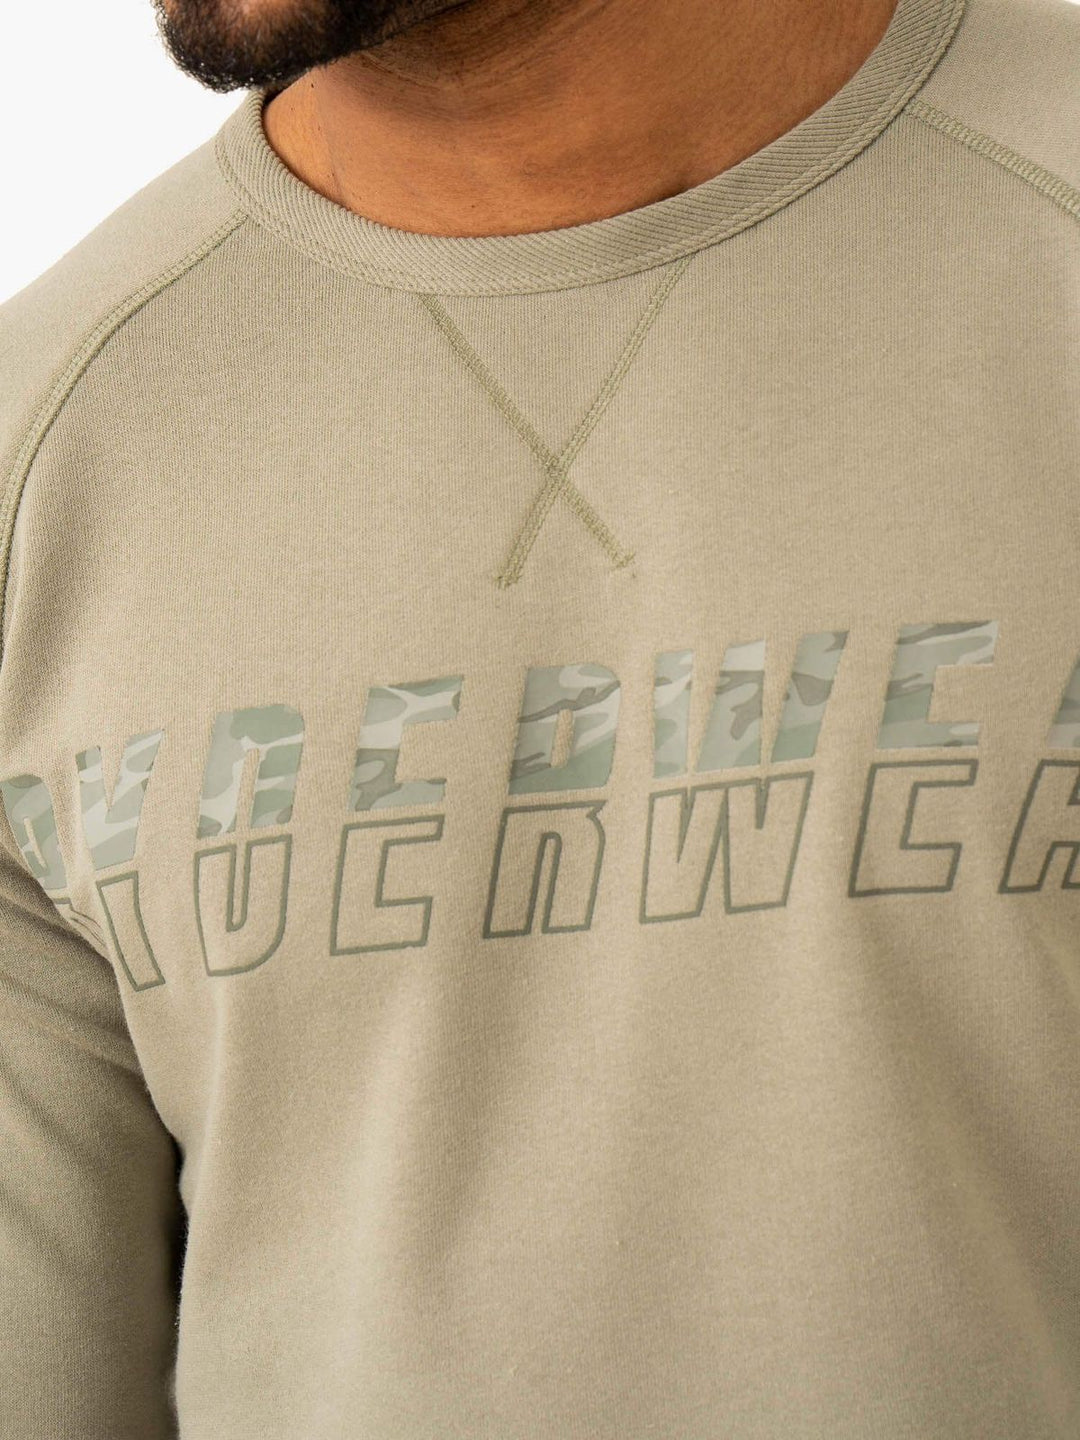 Overdrive Crew Neck - Sage Green Clothing Ryderwear 